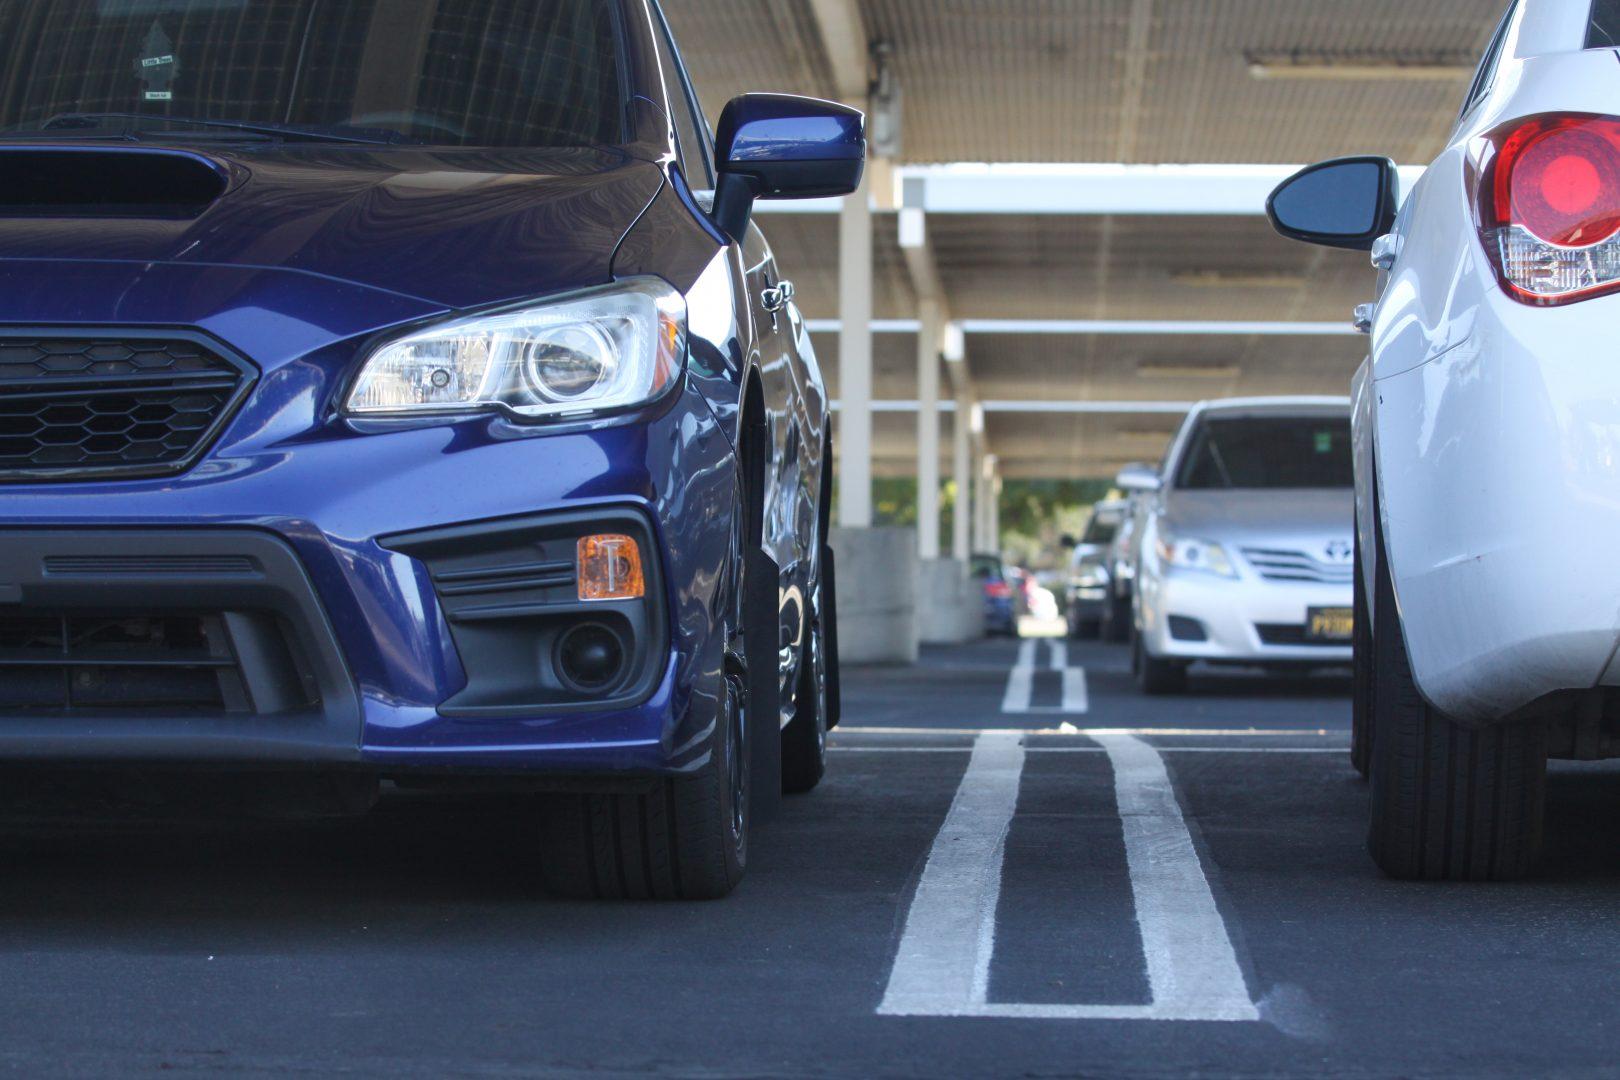 Cars parked under the panels in the P2 lot on Sept. 22. (Carlos Rene Castro/The Collegian)